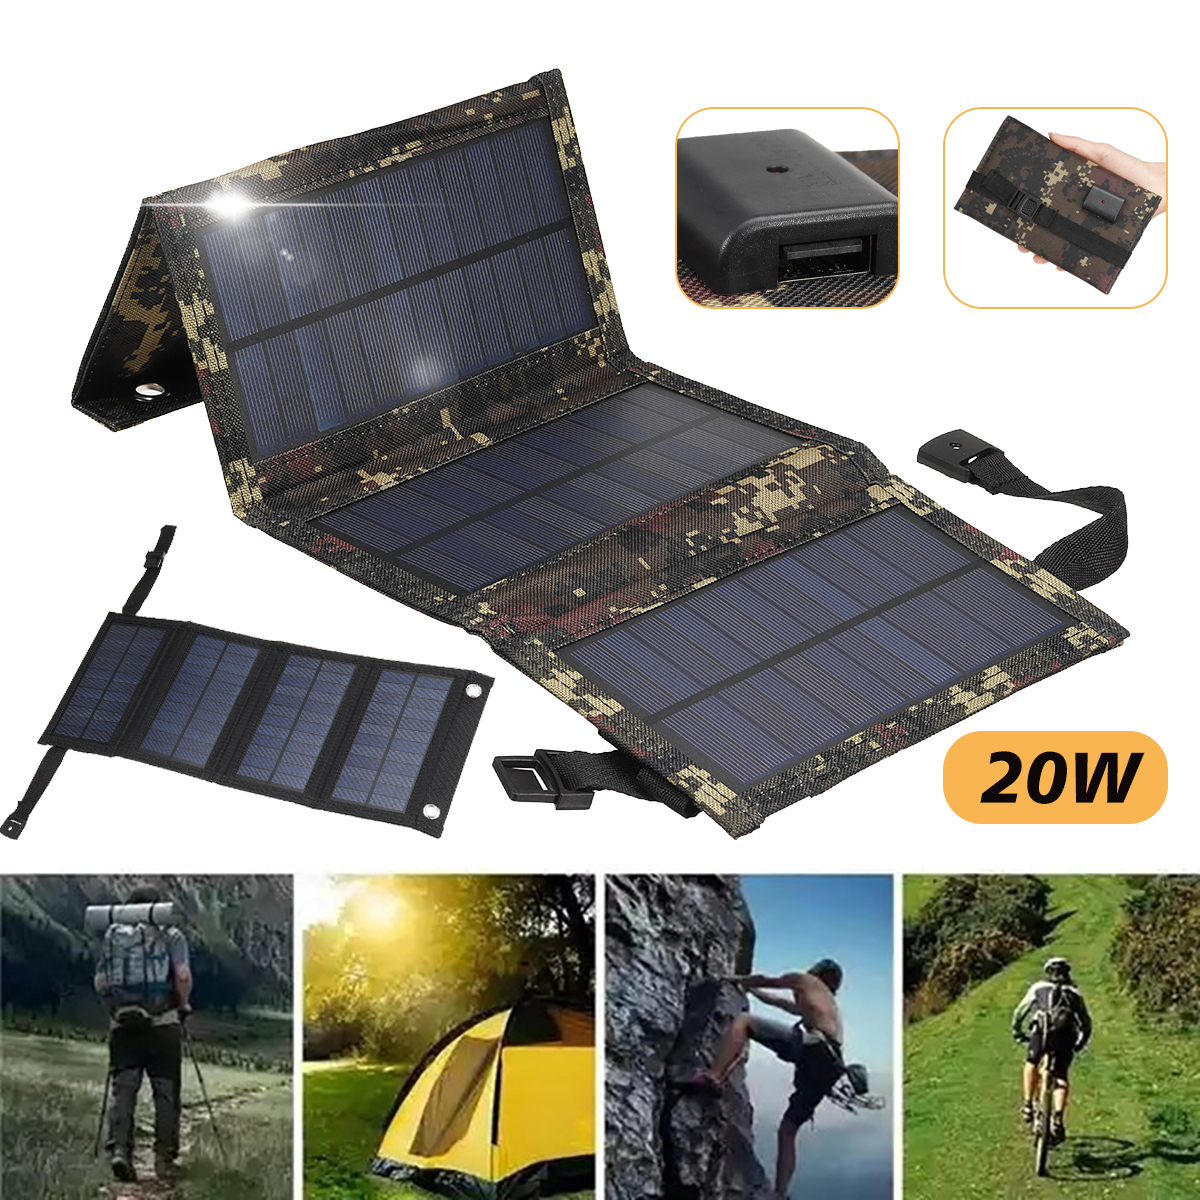 Chargers Portable Foldable 20w Solar Panel Charger For Outdoor Camping (color. Black) for